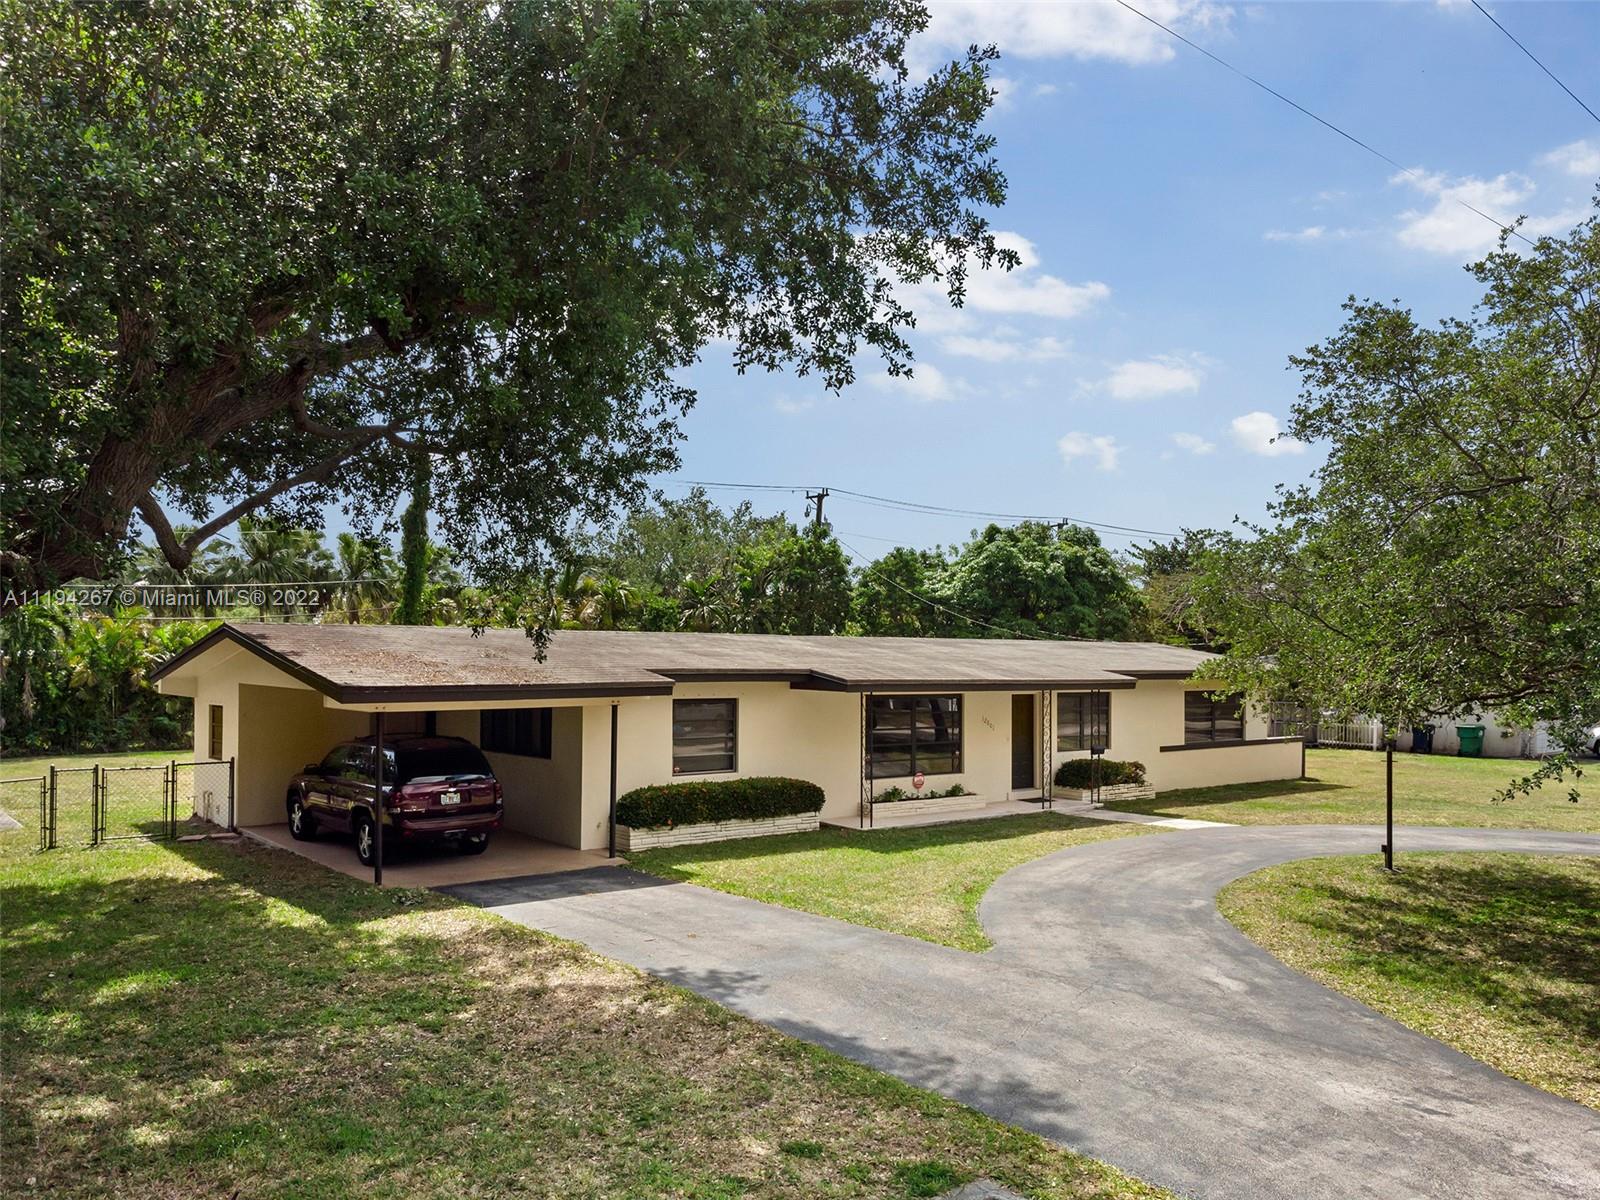 ***Central Park in Pinecrest*** 4 bed / 2.5 bath / 1 car carport on deep 17,000sf lot. All Palmetto schools. Needs updating but very livable and worth the investment. A must see!